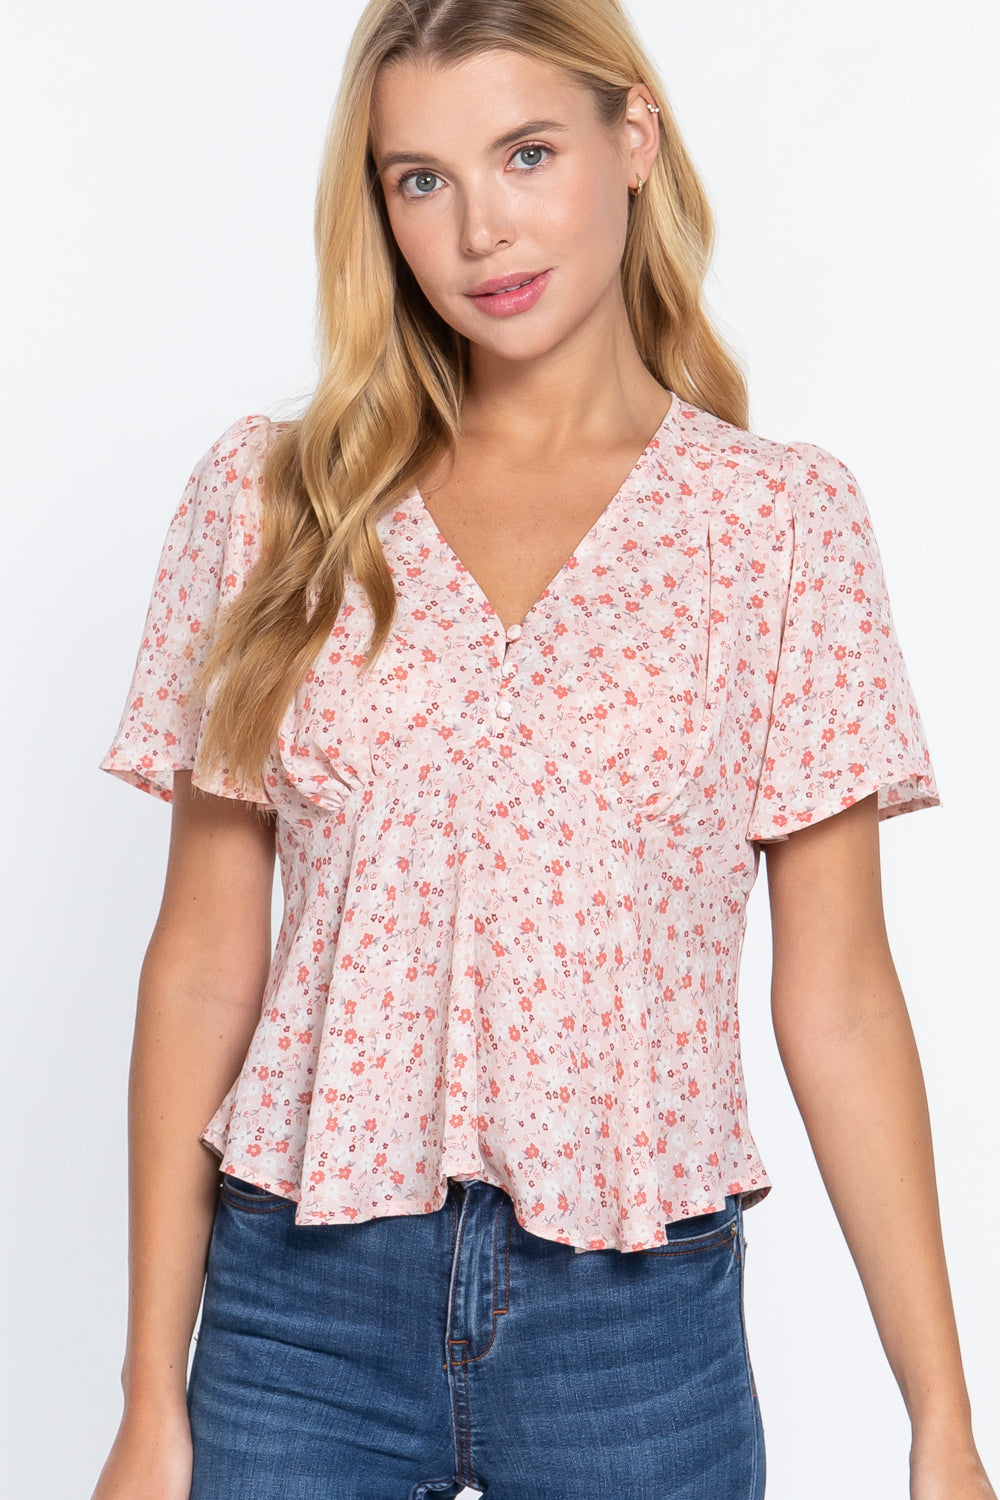 Ruffle Slv W/back Tie Print Woven Top Smile Sparker